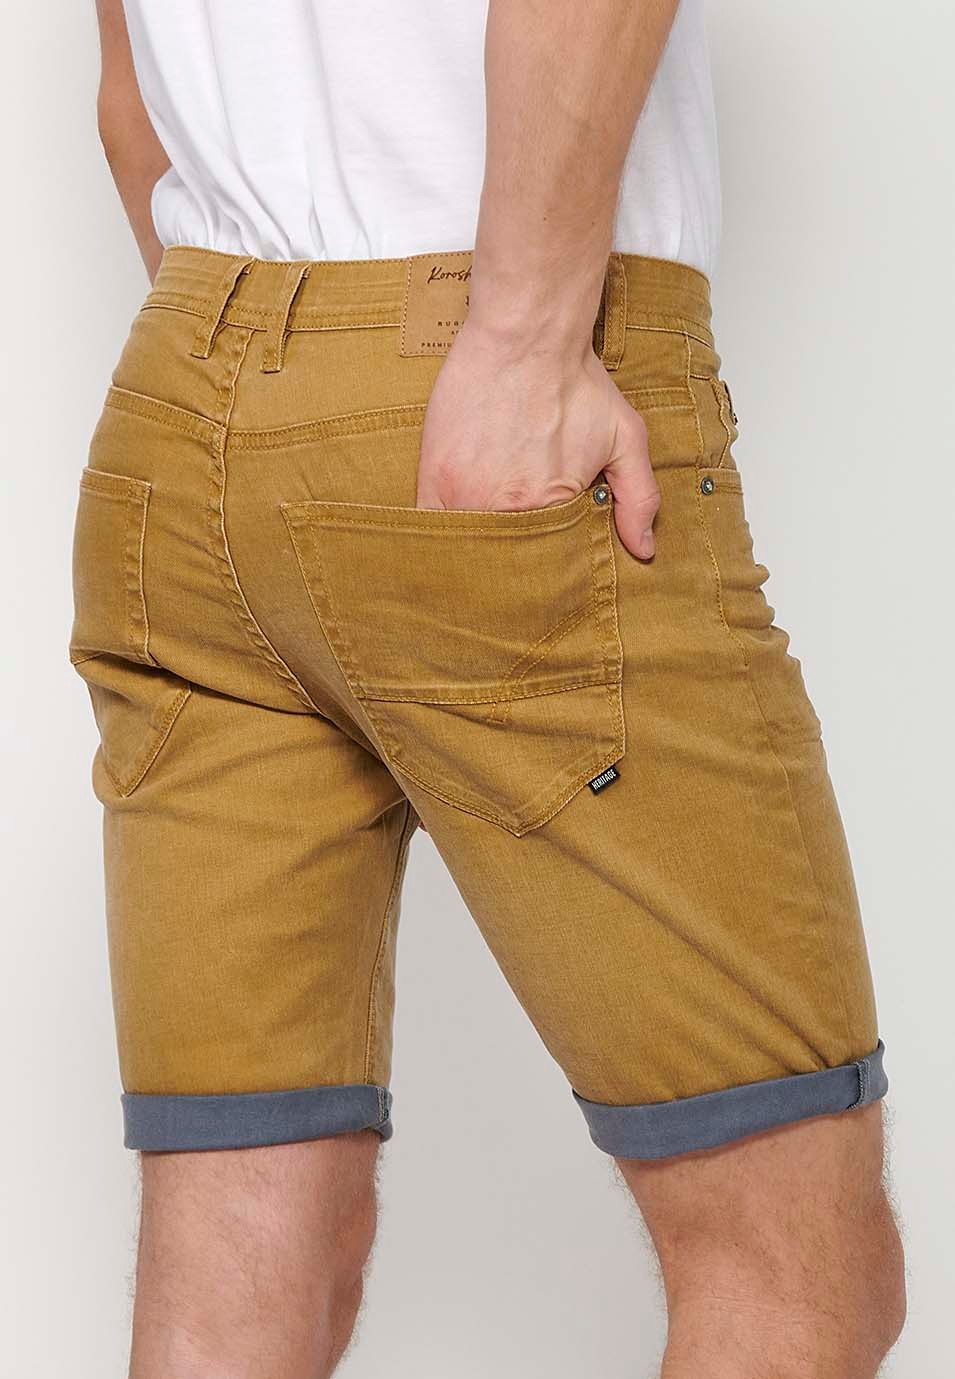 Denim Bermuda shorts with turn-up finish, front closure with zipper and button, with five pockets, one pocket pocket, Ocher Color for Men 5